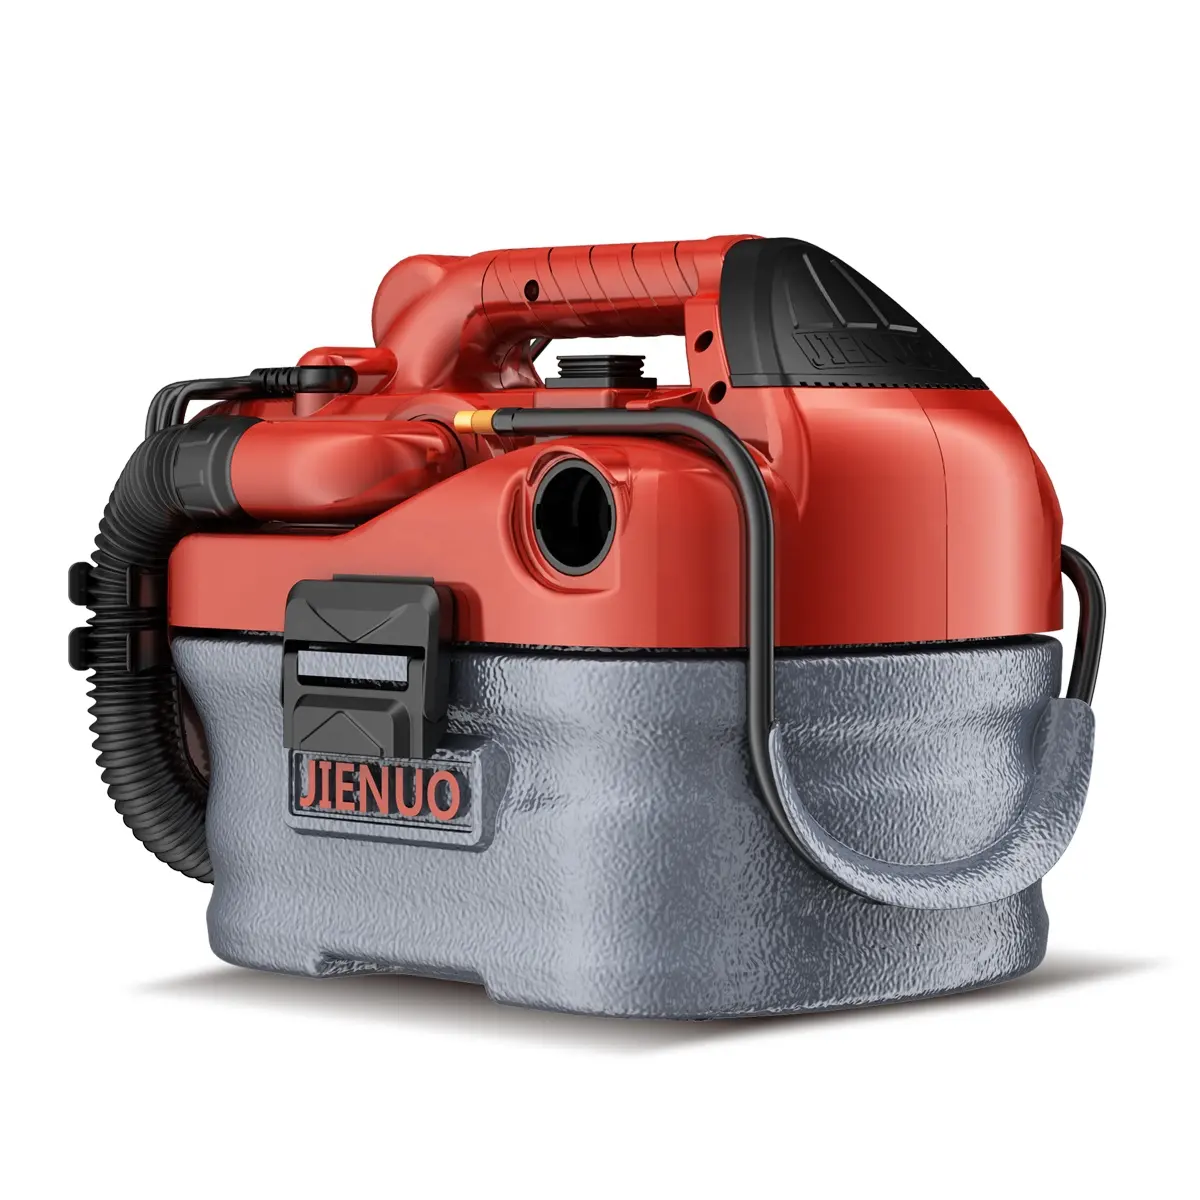 JIENUO 4 Gallon battery Wet Dry Vacuum, 4 Peak HP Stainless Steel 3 in 1 Shop Vac Blower with Powerful Suction